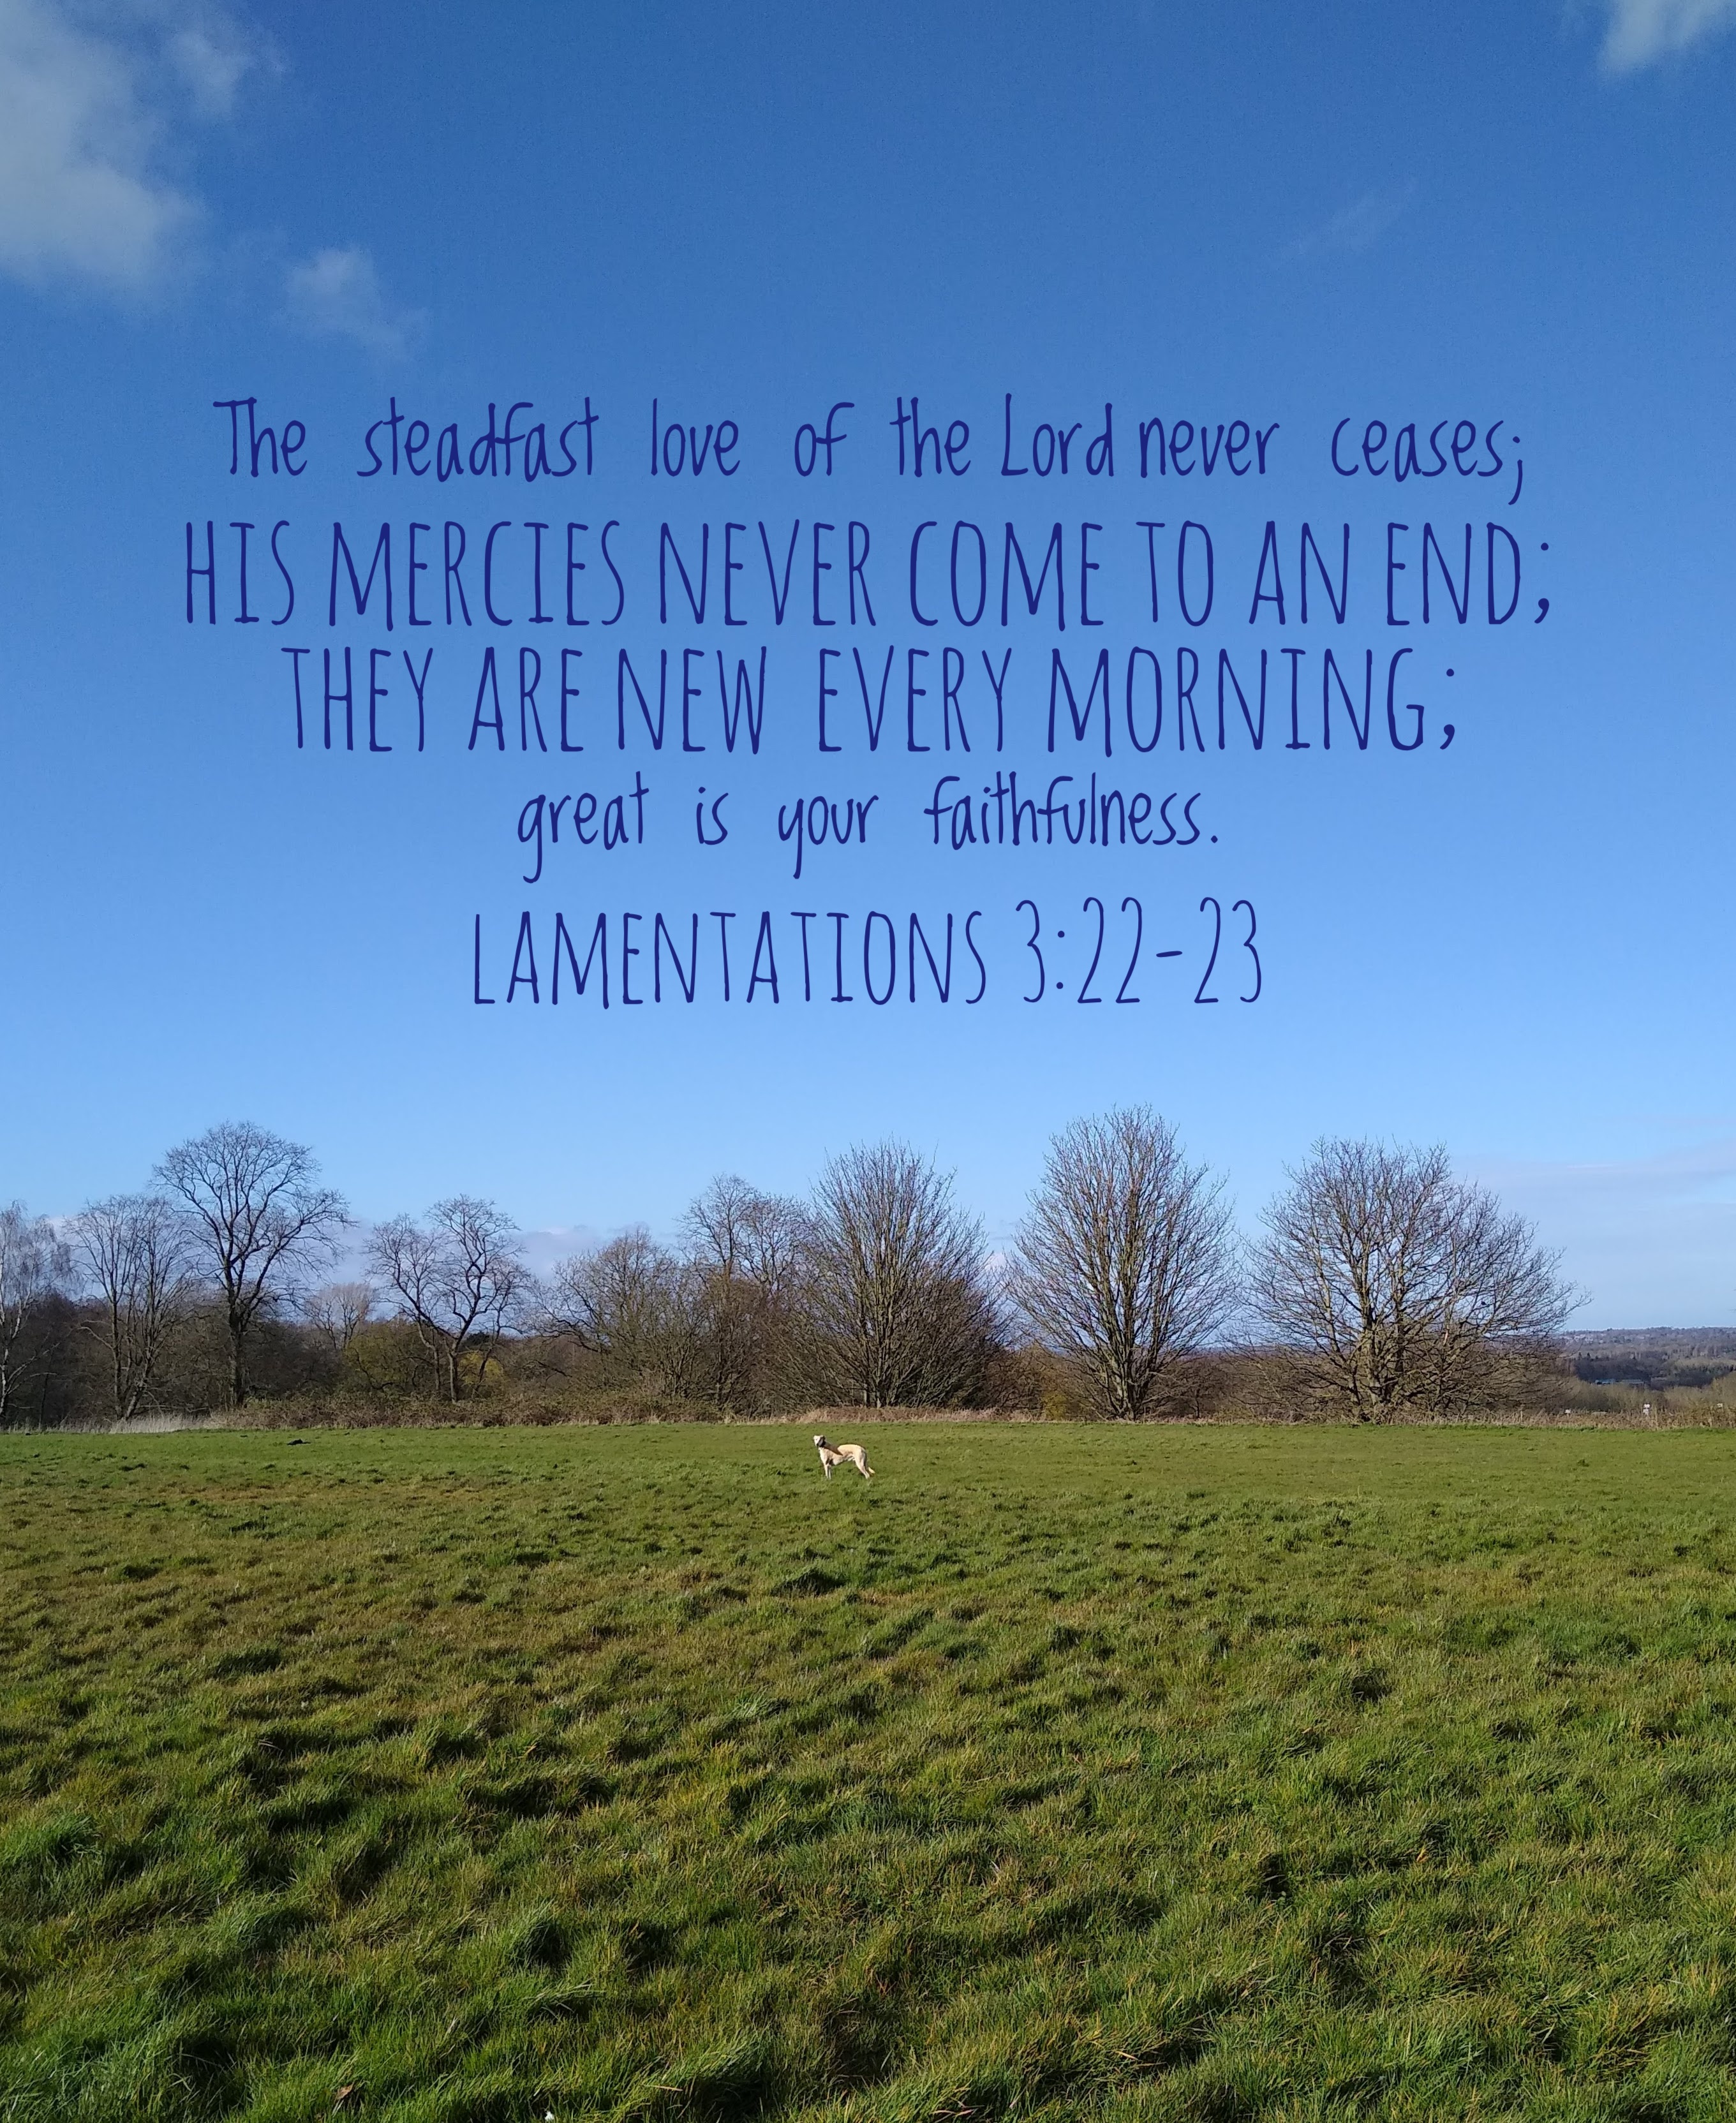 [Text on picture of blue sky, trees, green grass, dog] The steadfast love of the Lord never ceases; his mercies never come to an end; they are new every morning; great is your faithfulness.